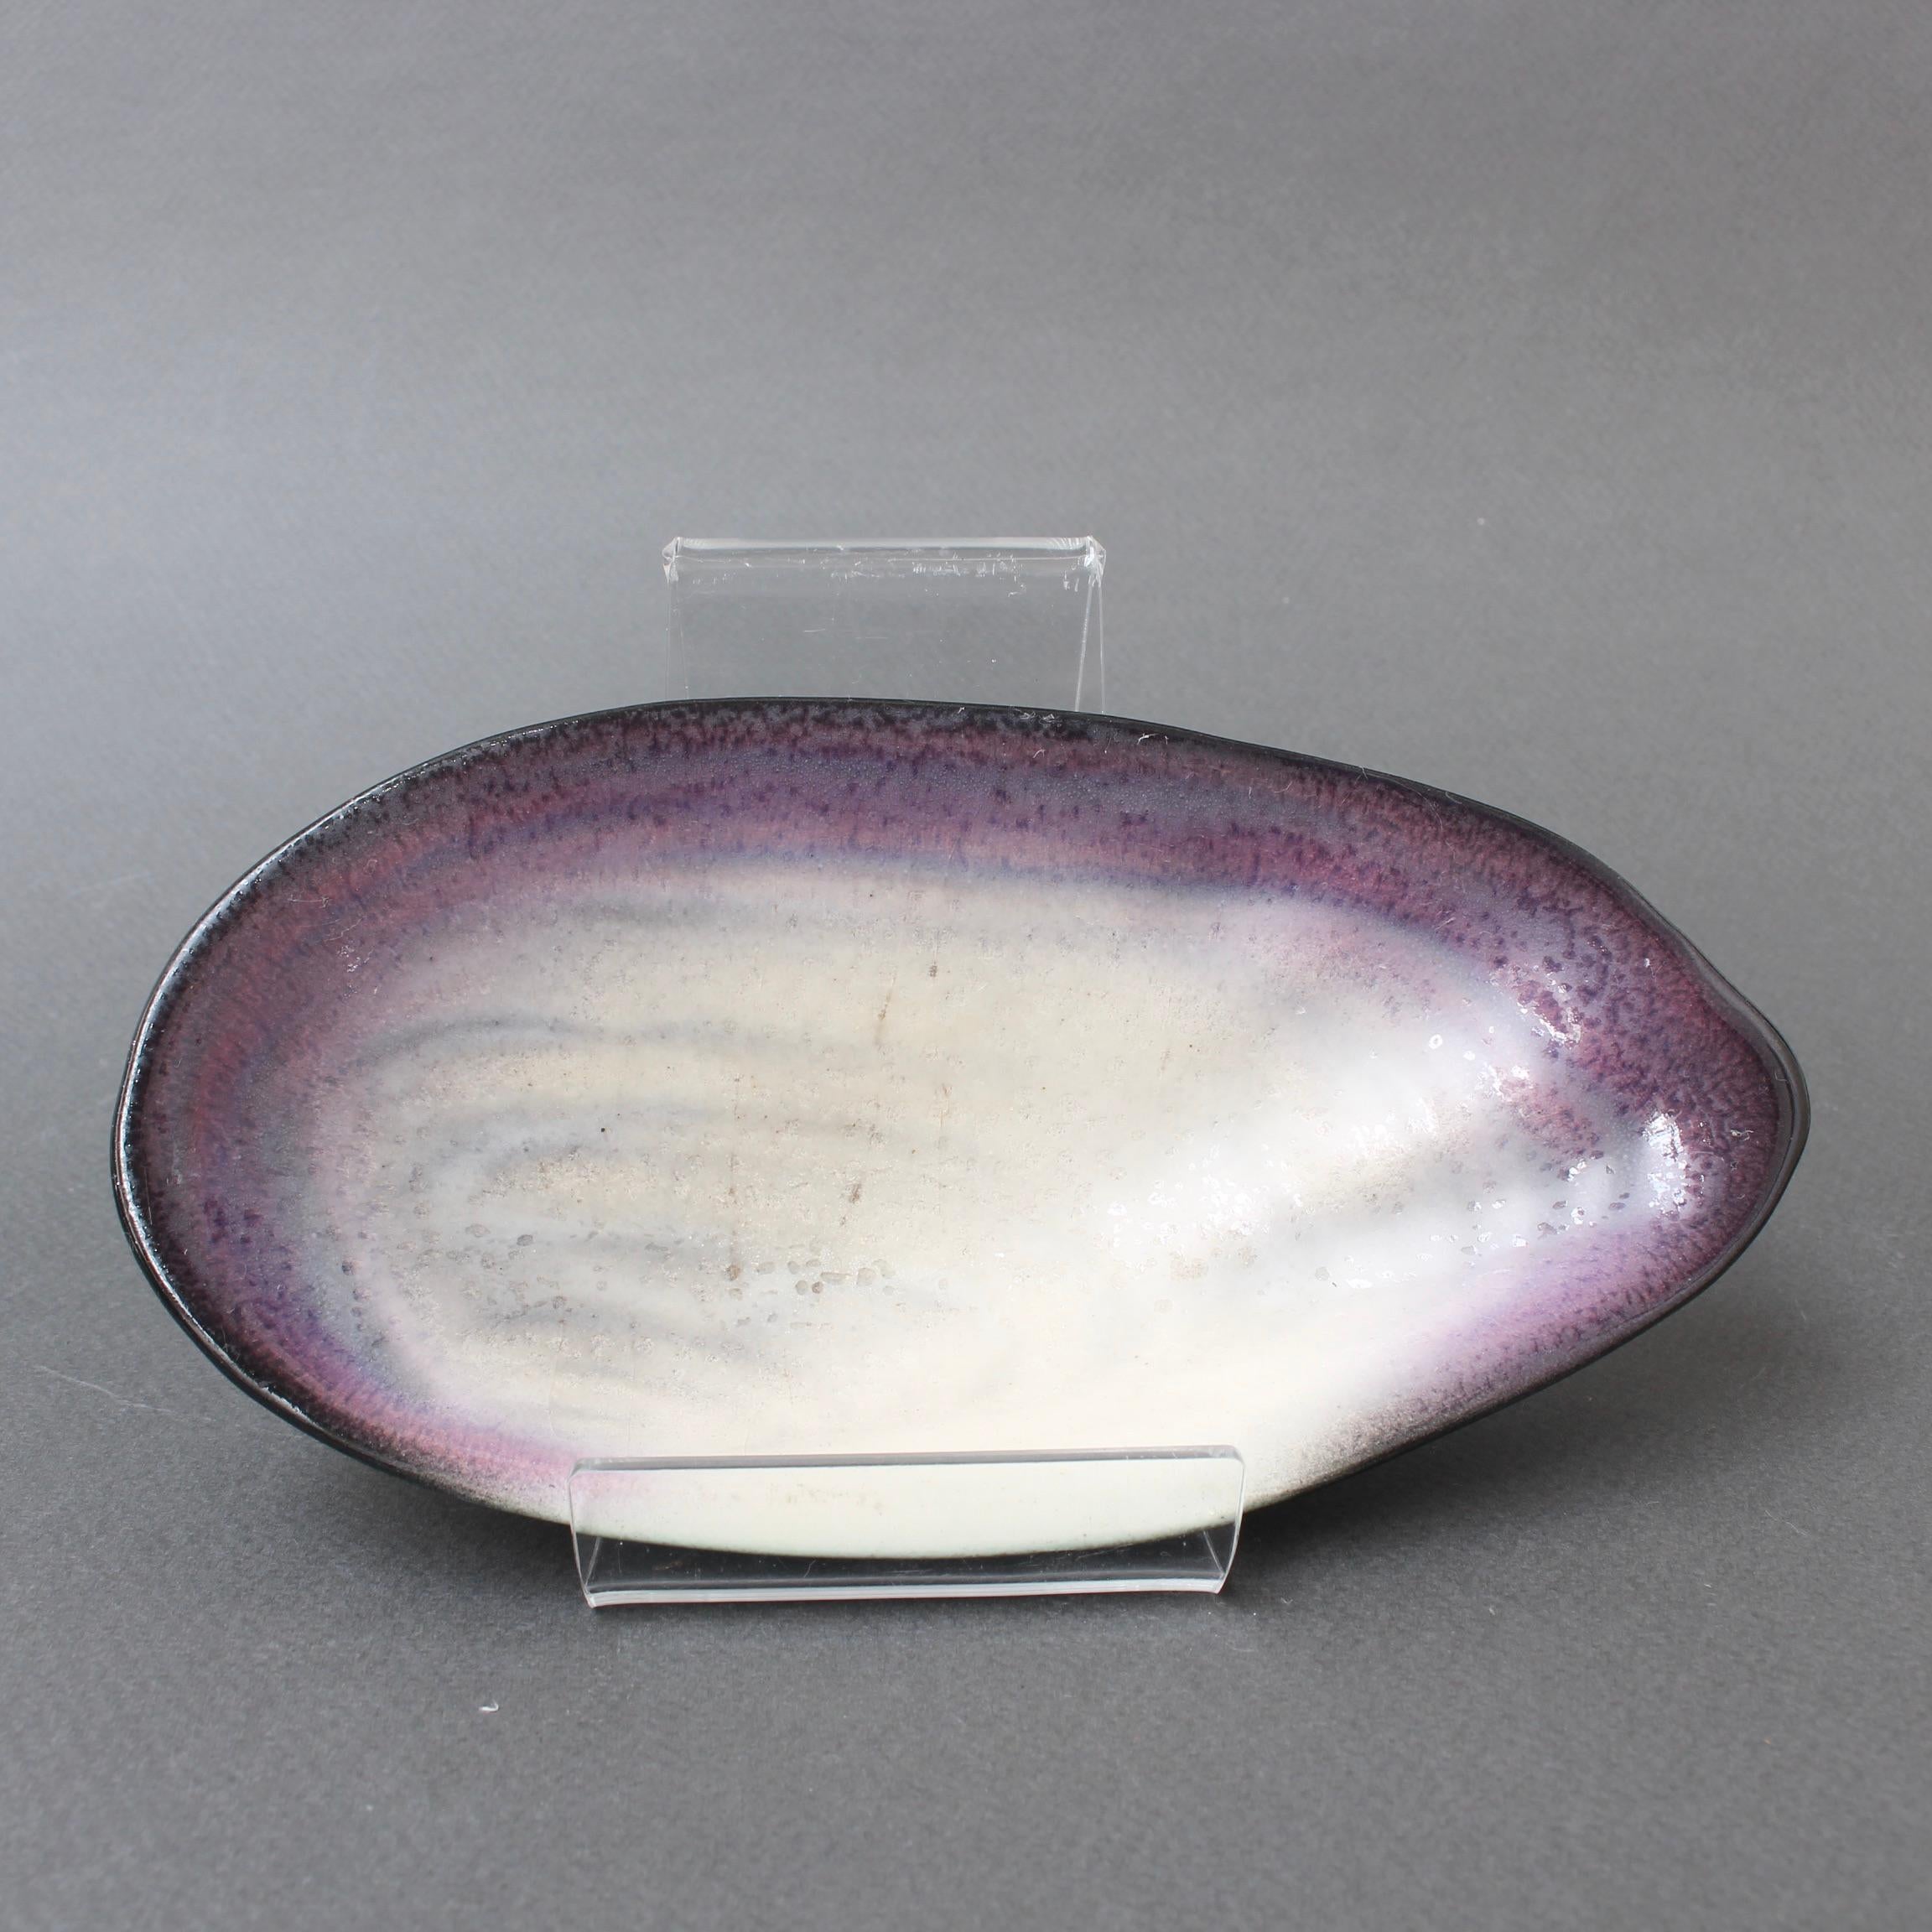 Decorative ceramic vide-poche by Pol Chambost (circa 1950s). Small yet elegant seashell-shaped form with white base and dark, grape-purple outline and lip. Outside of the centre, the form is colored in a refined matt black giving the whole a